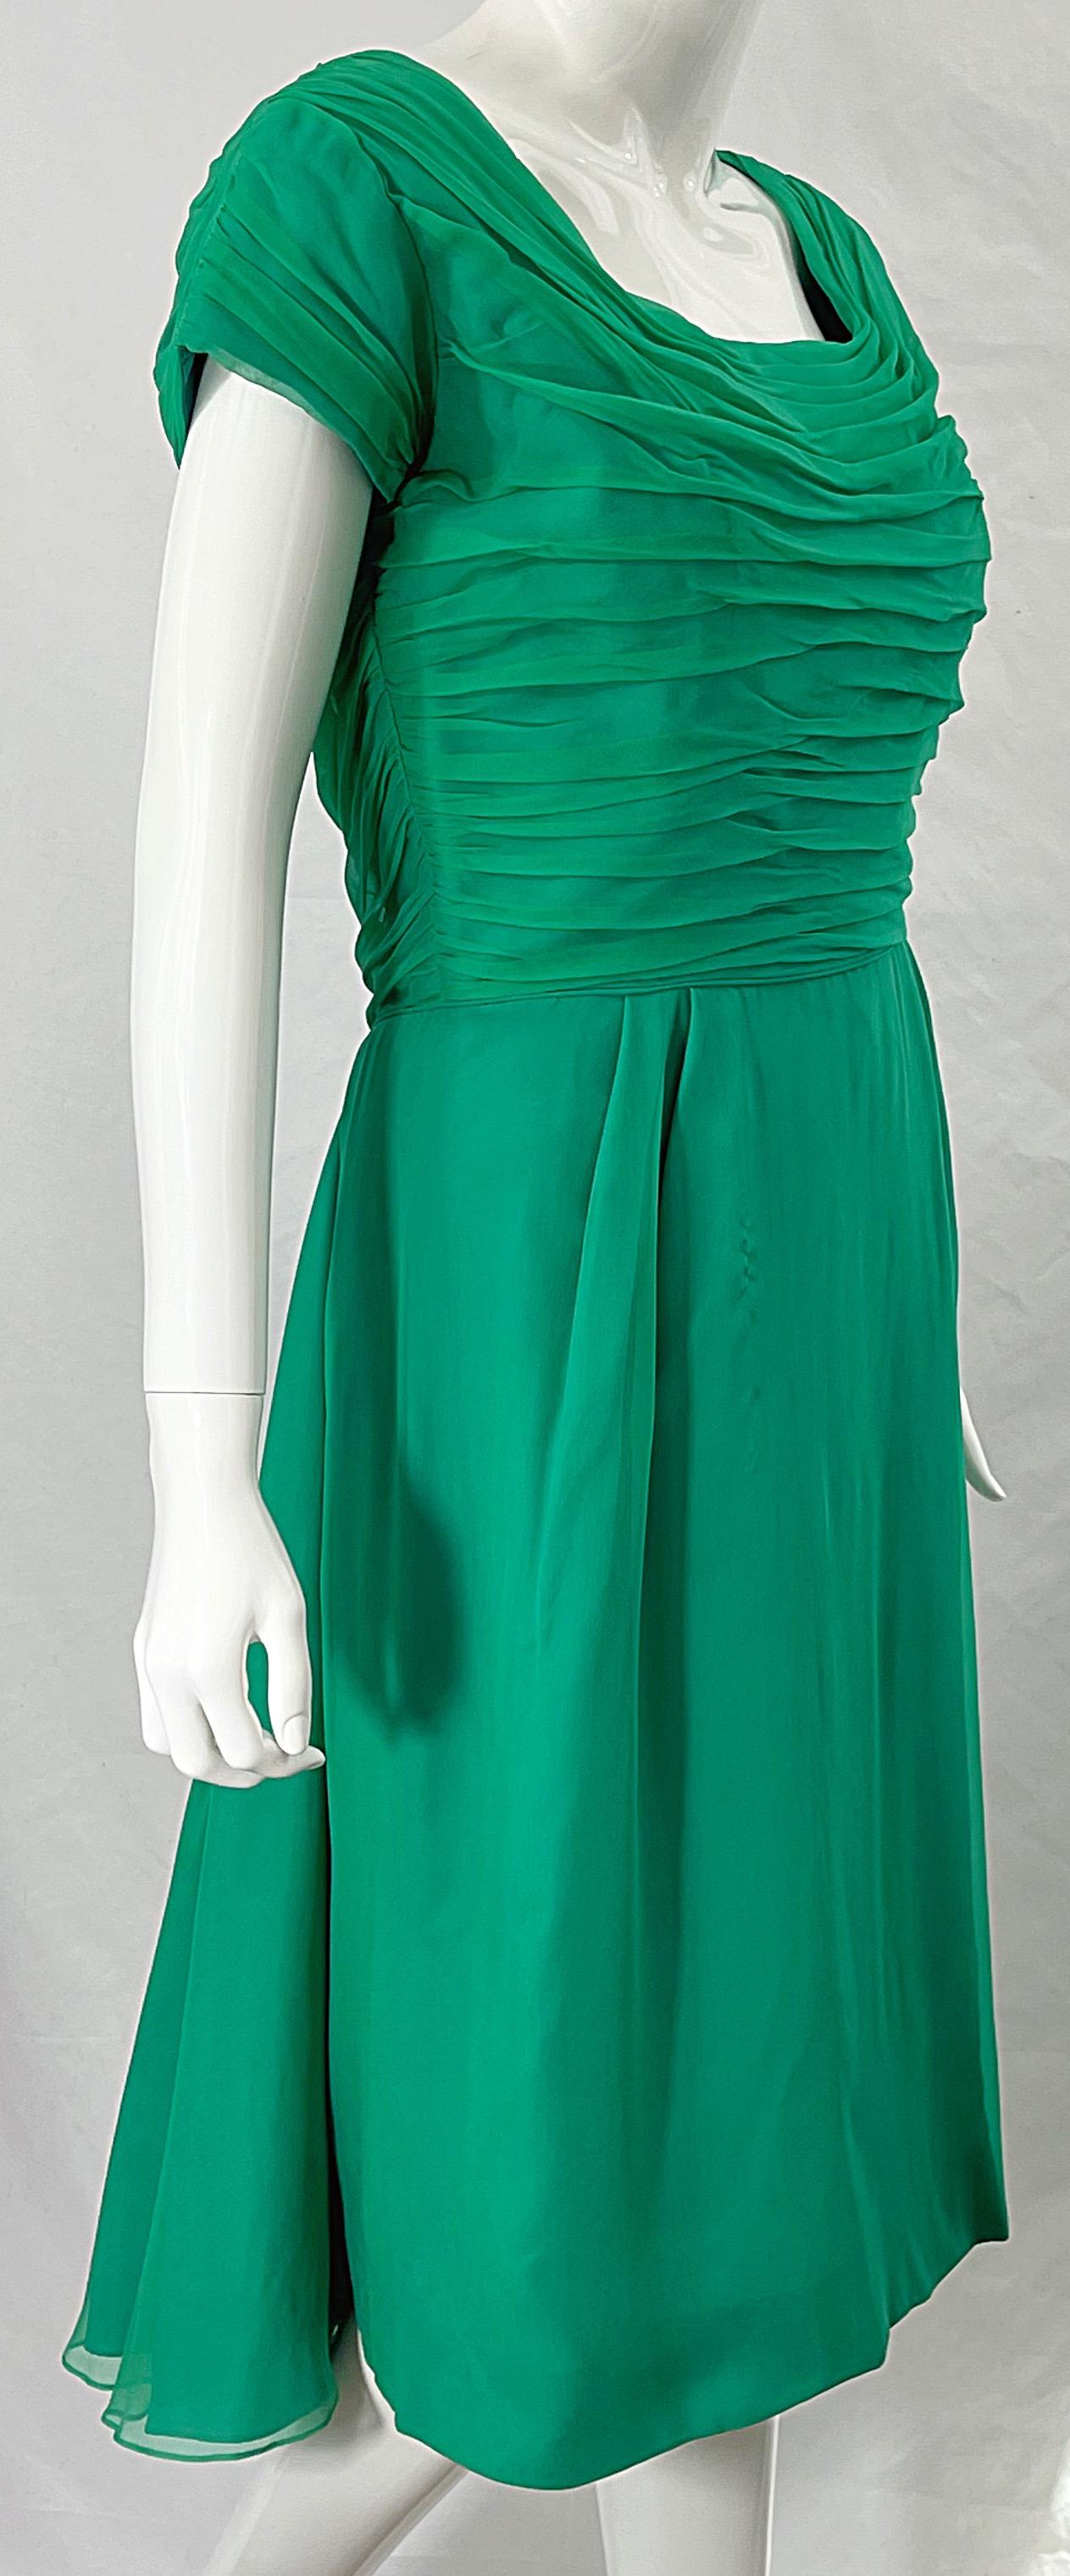 Women's 1950s Kelly Green Demi Couture Silk Chiffon Vintage Short Sleeve 50s Dress For Sale